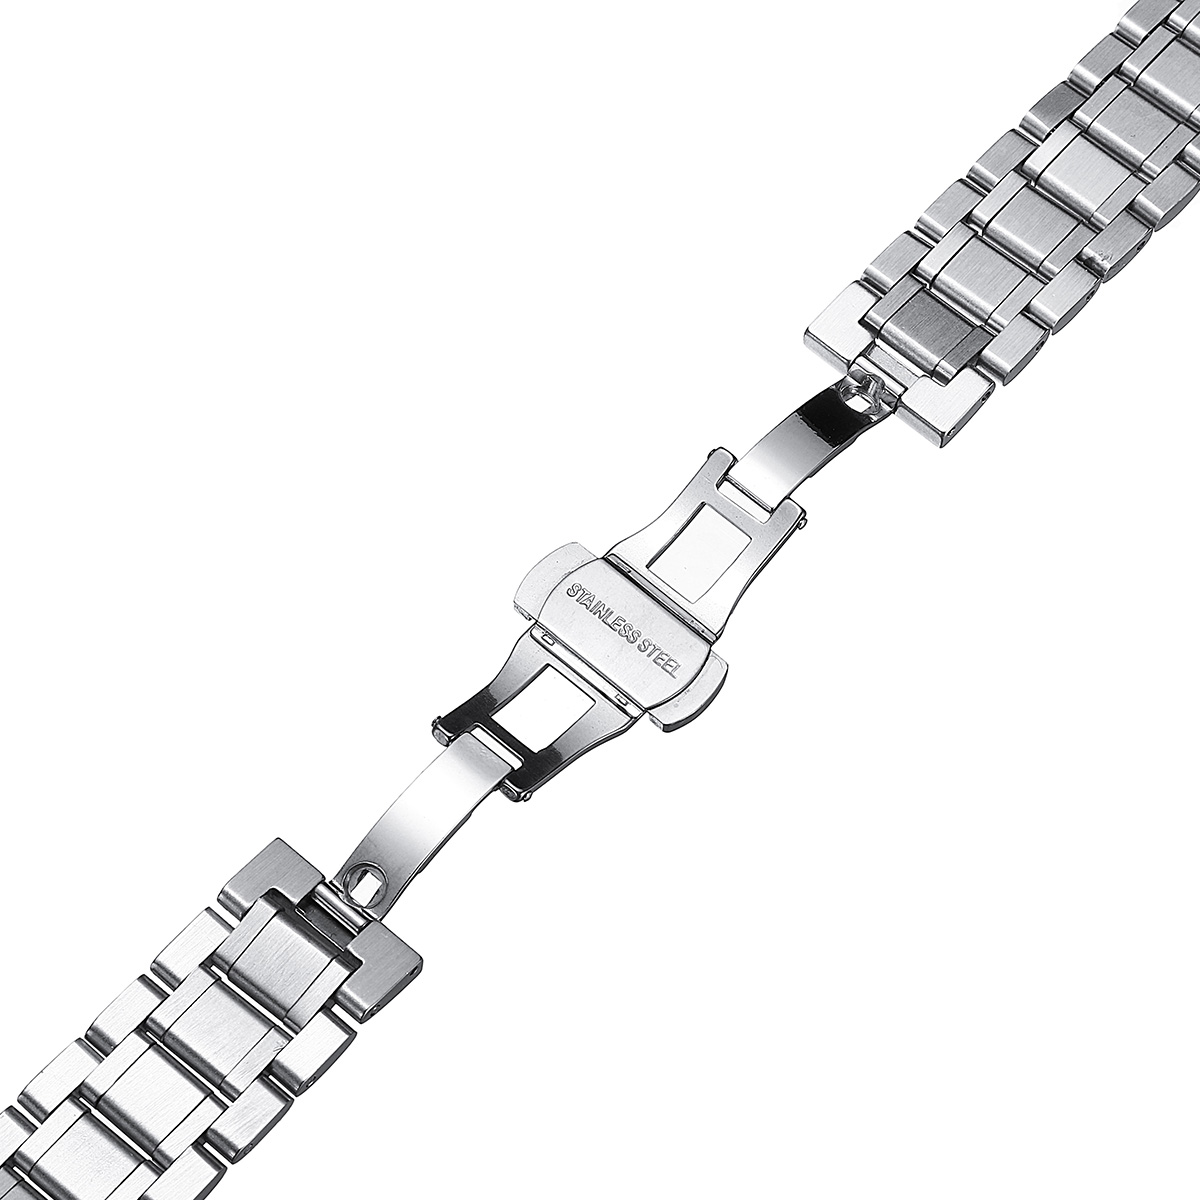 18-22mm-Stainless-Steel-Watch-Band-Clasp-Metal-Strap-Replacement-With-Spring-Bars-1368341